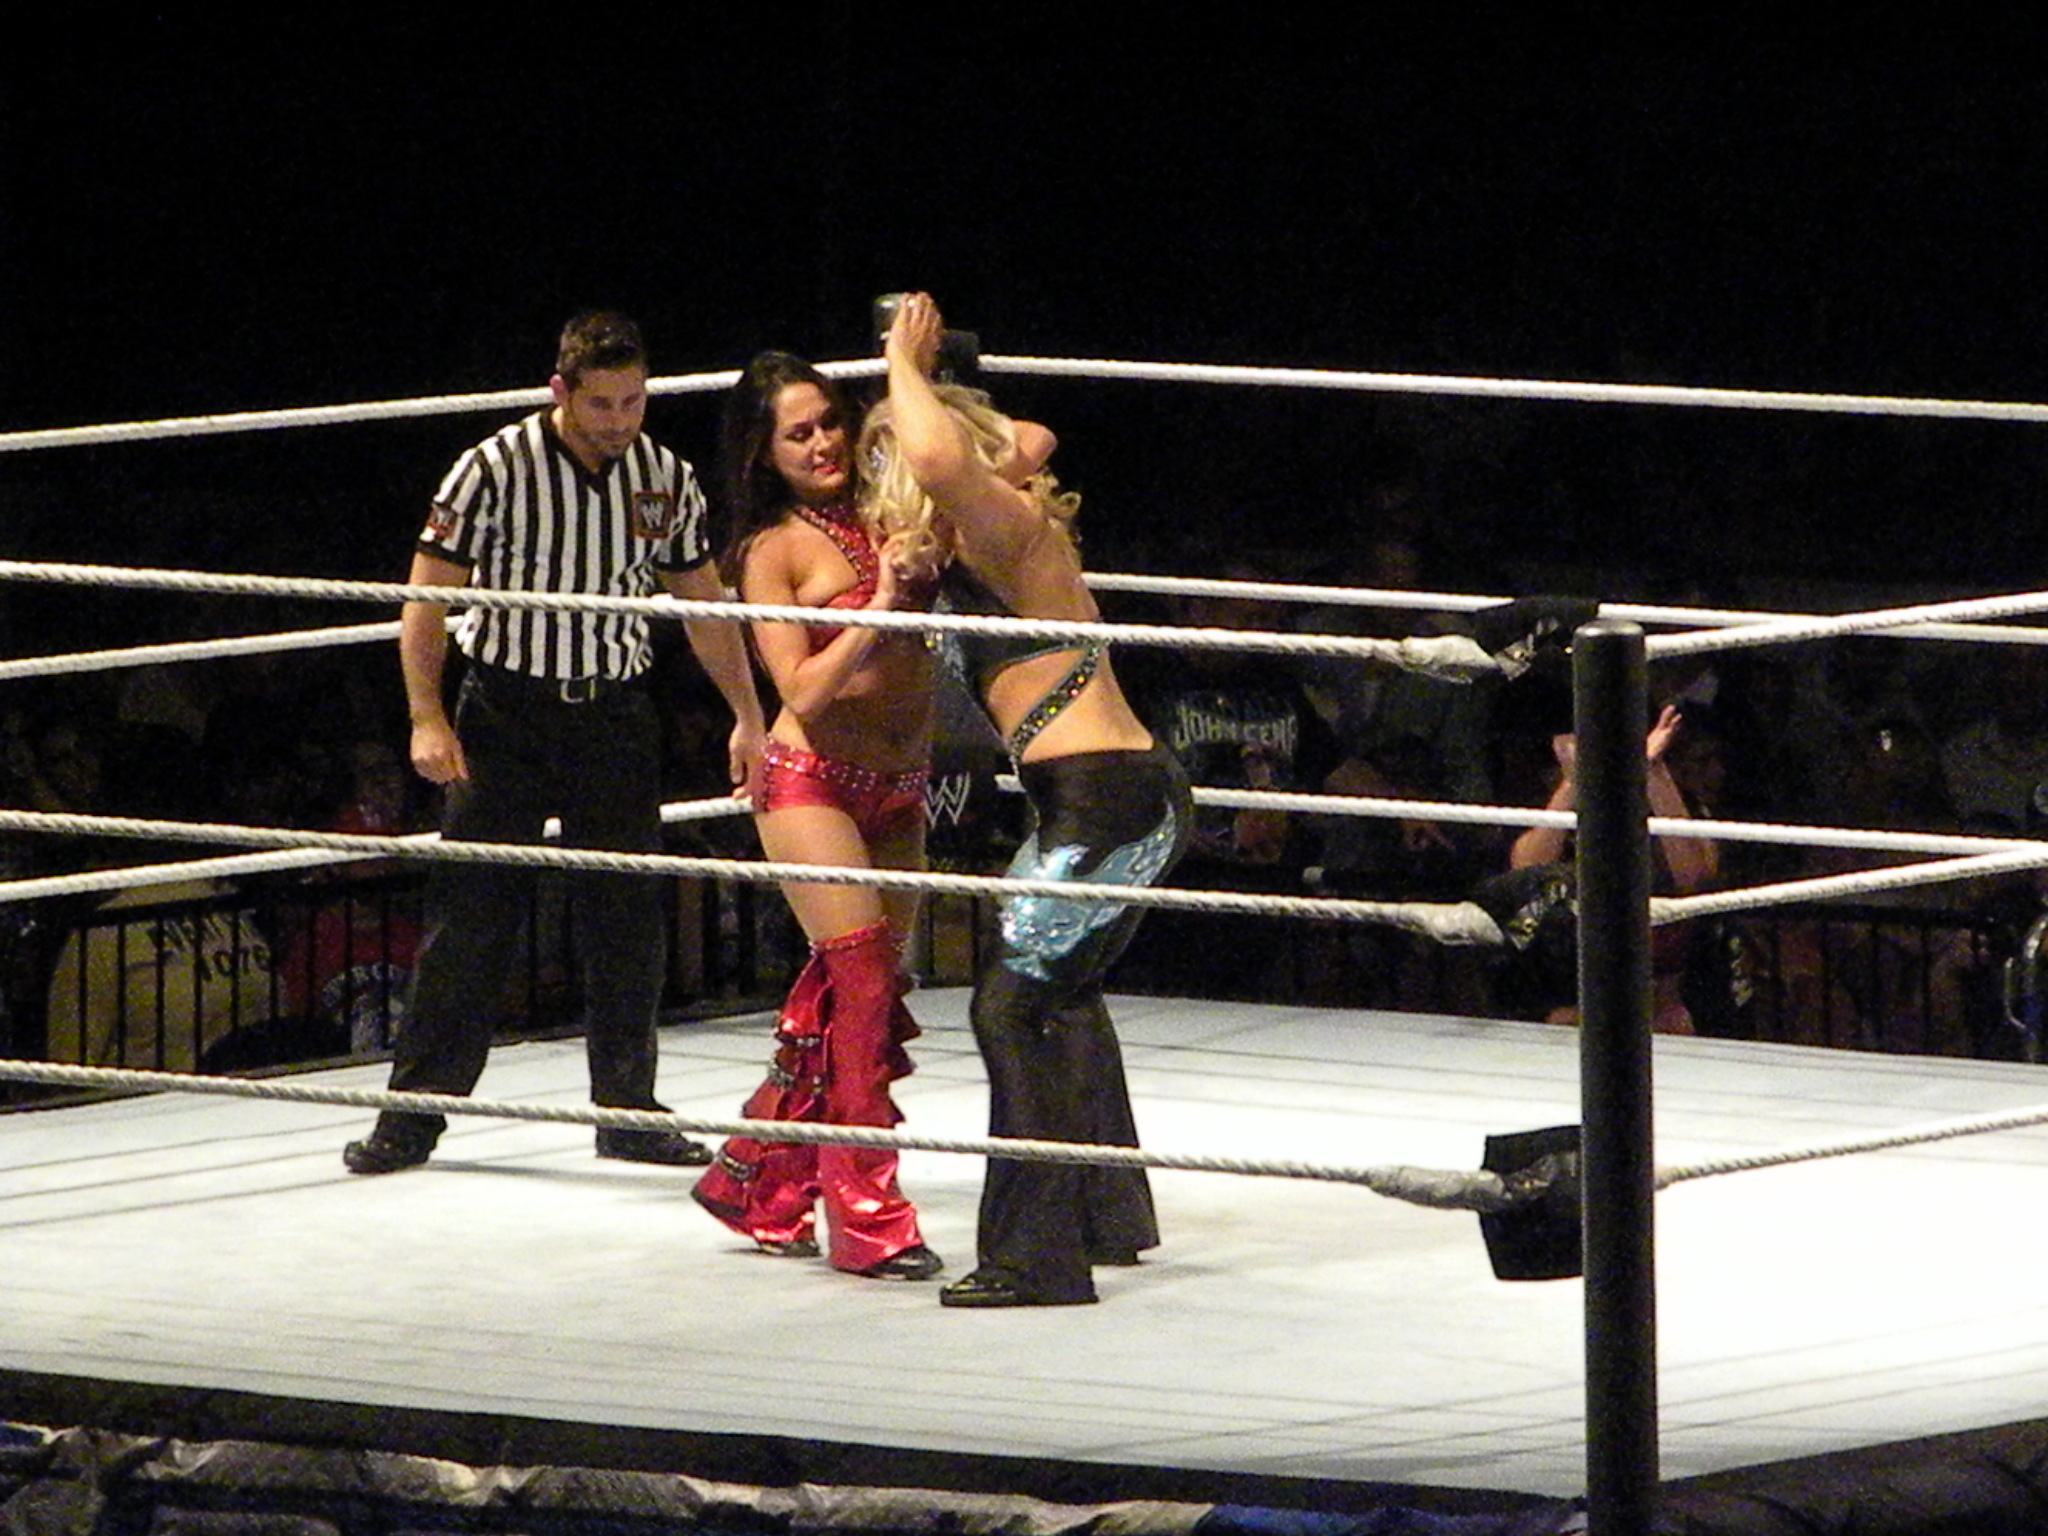 two women wrestling in a boxing ring